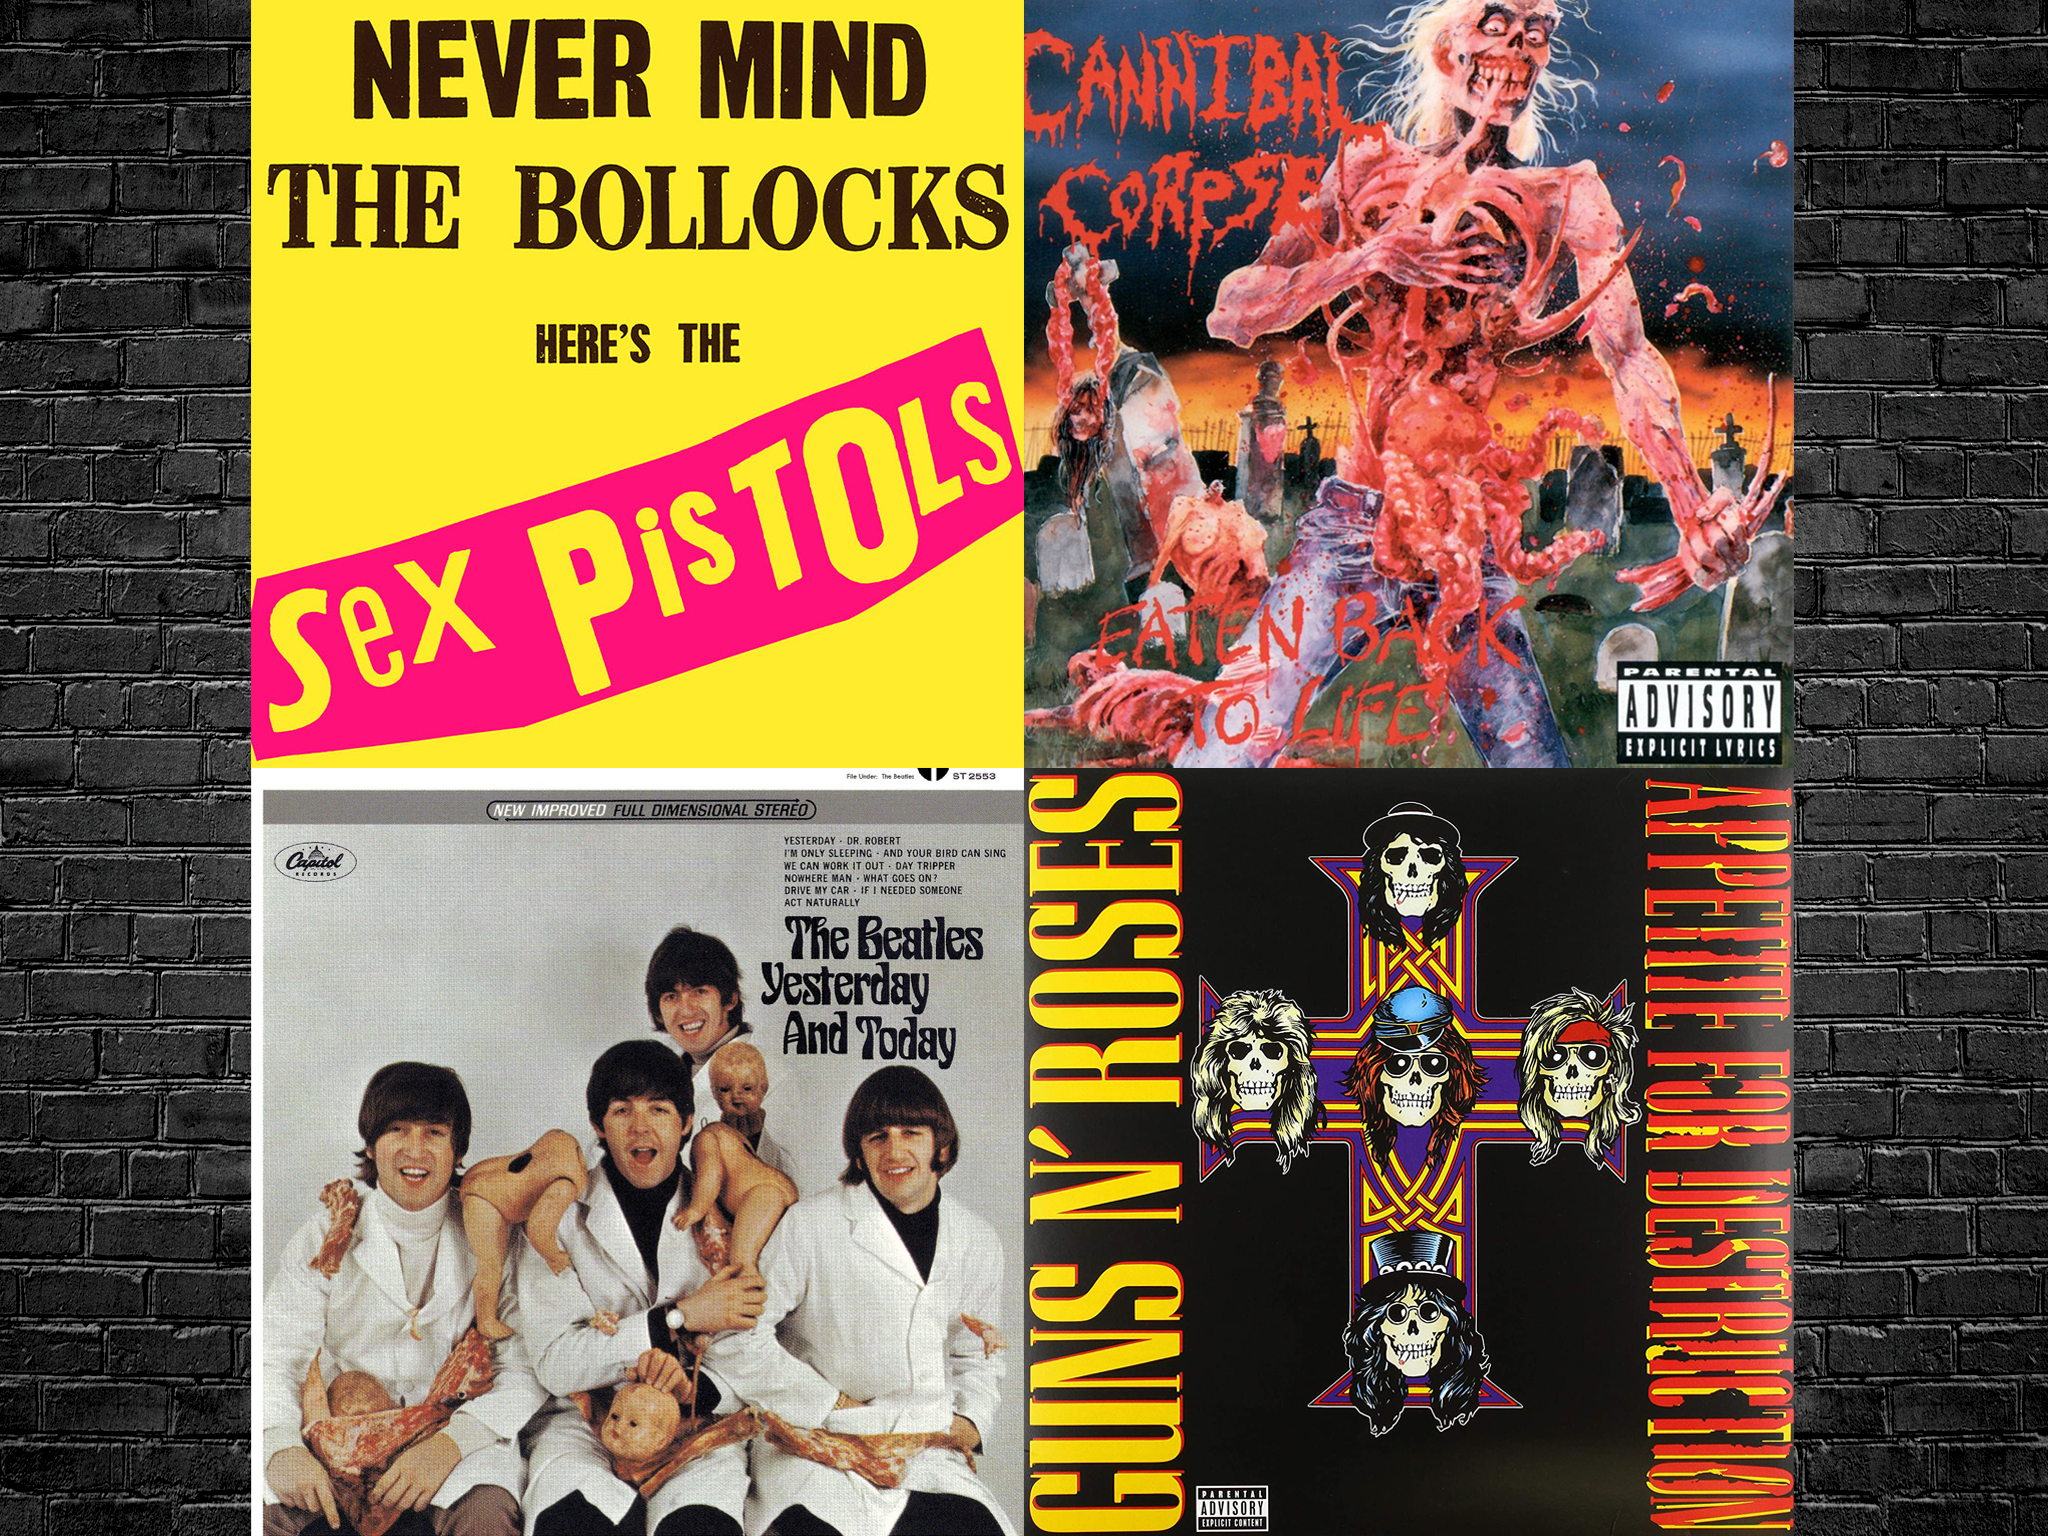 Top left clockwise: Artwork for the Sex Pistols, Cannibal Corpse, Guns N’ Roses, and The Beatles